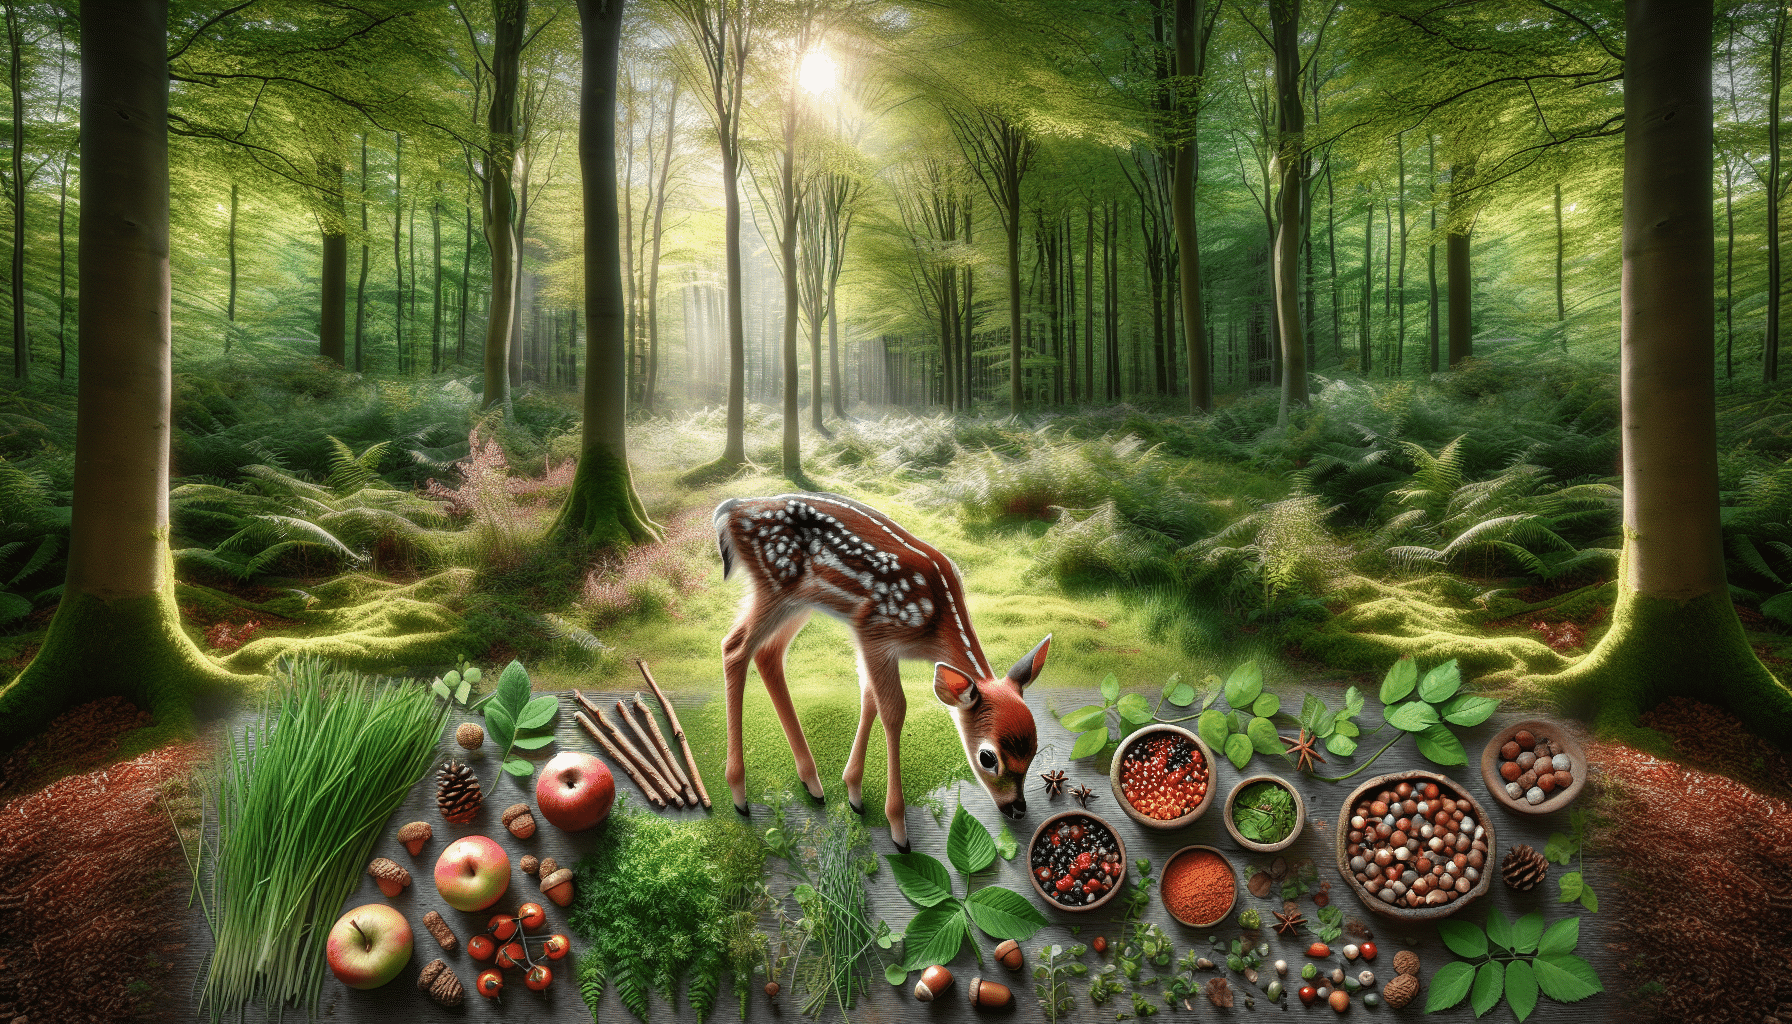 Create a picturesque depiction of a forest glade during early spring, characterized by the light dappling through the overhead canopy onto a lush carpet of flora below. In the midst of this serene setting, a fawn with spotted fur and innocent eyes is grazing on tender leaves and grasses. Nearby, a varied assortment of natural food sources for fawns more generally, such as acorns, berries, and twigs, are scattered around in a visually appealing manner. Please ensure that no people, text, or brand names are visible anywhere in the scene.